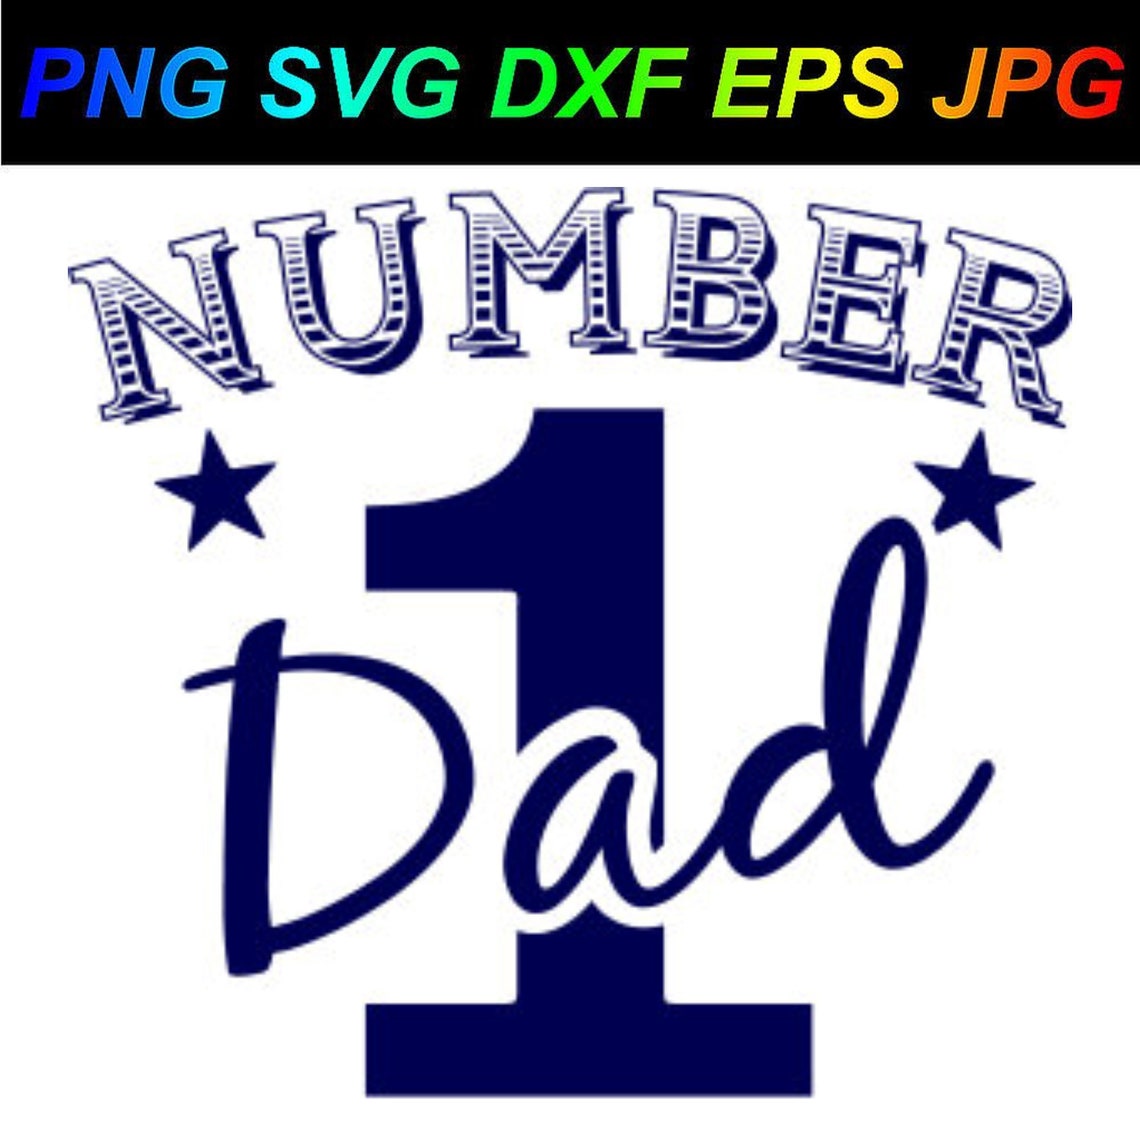 Number 1 Dad PNG SVG DXF Eps Jpg Cricut Silhouette - Etsy Singapore